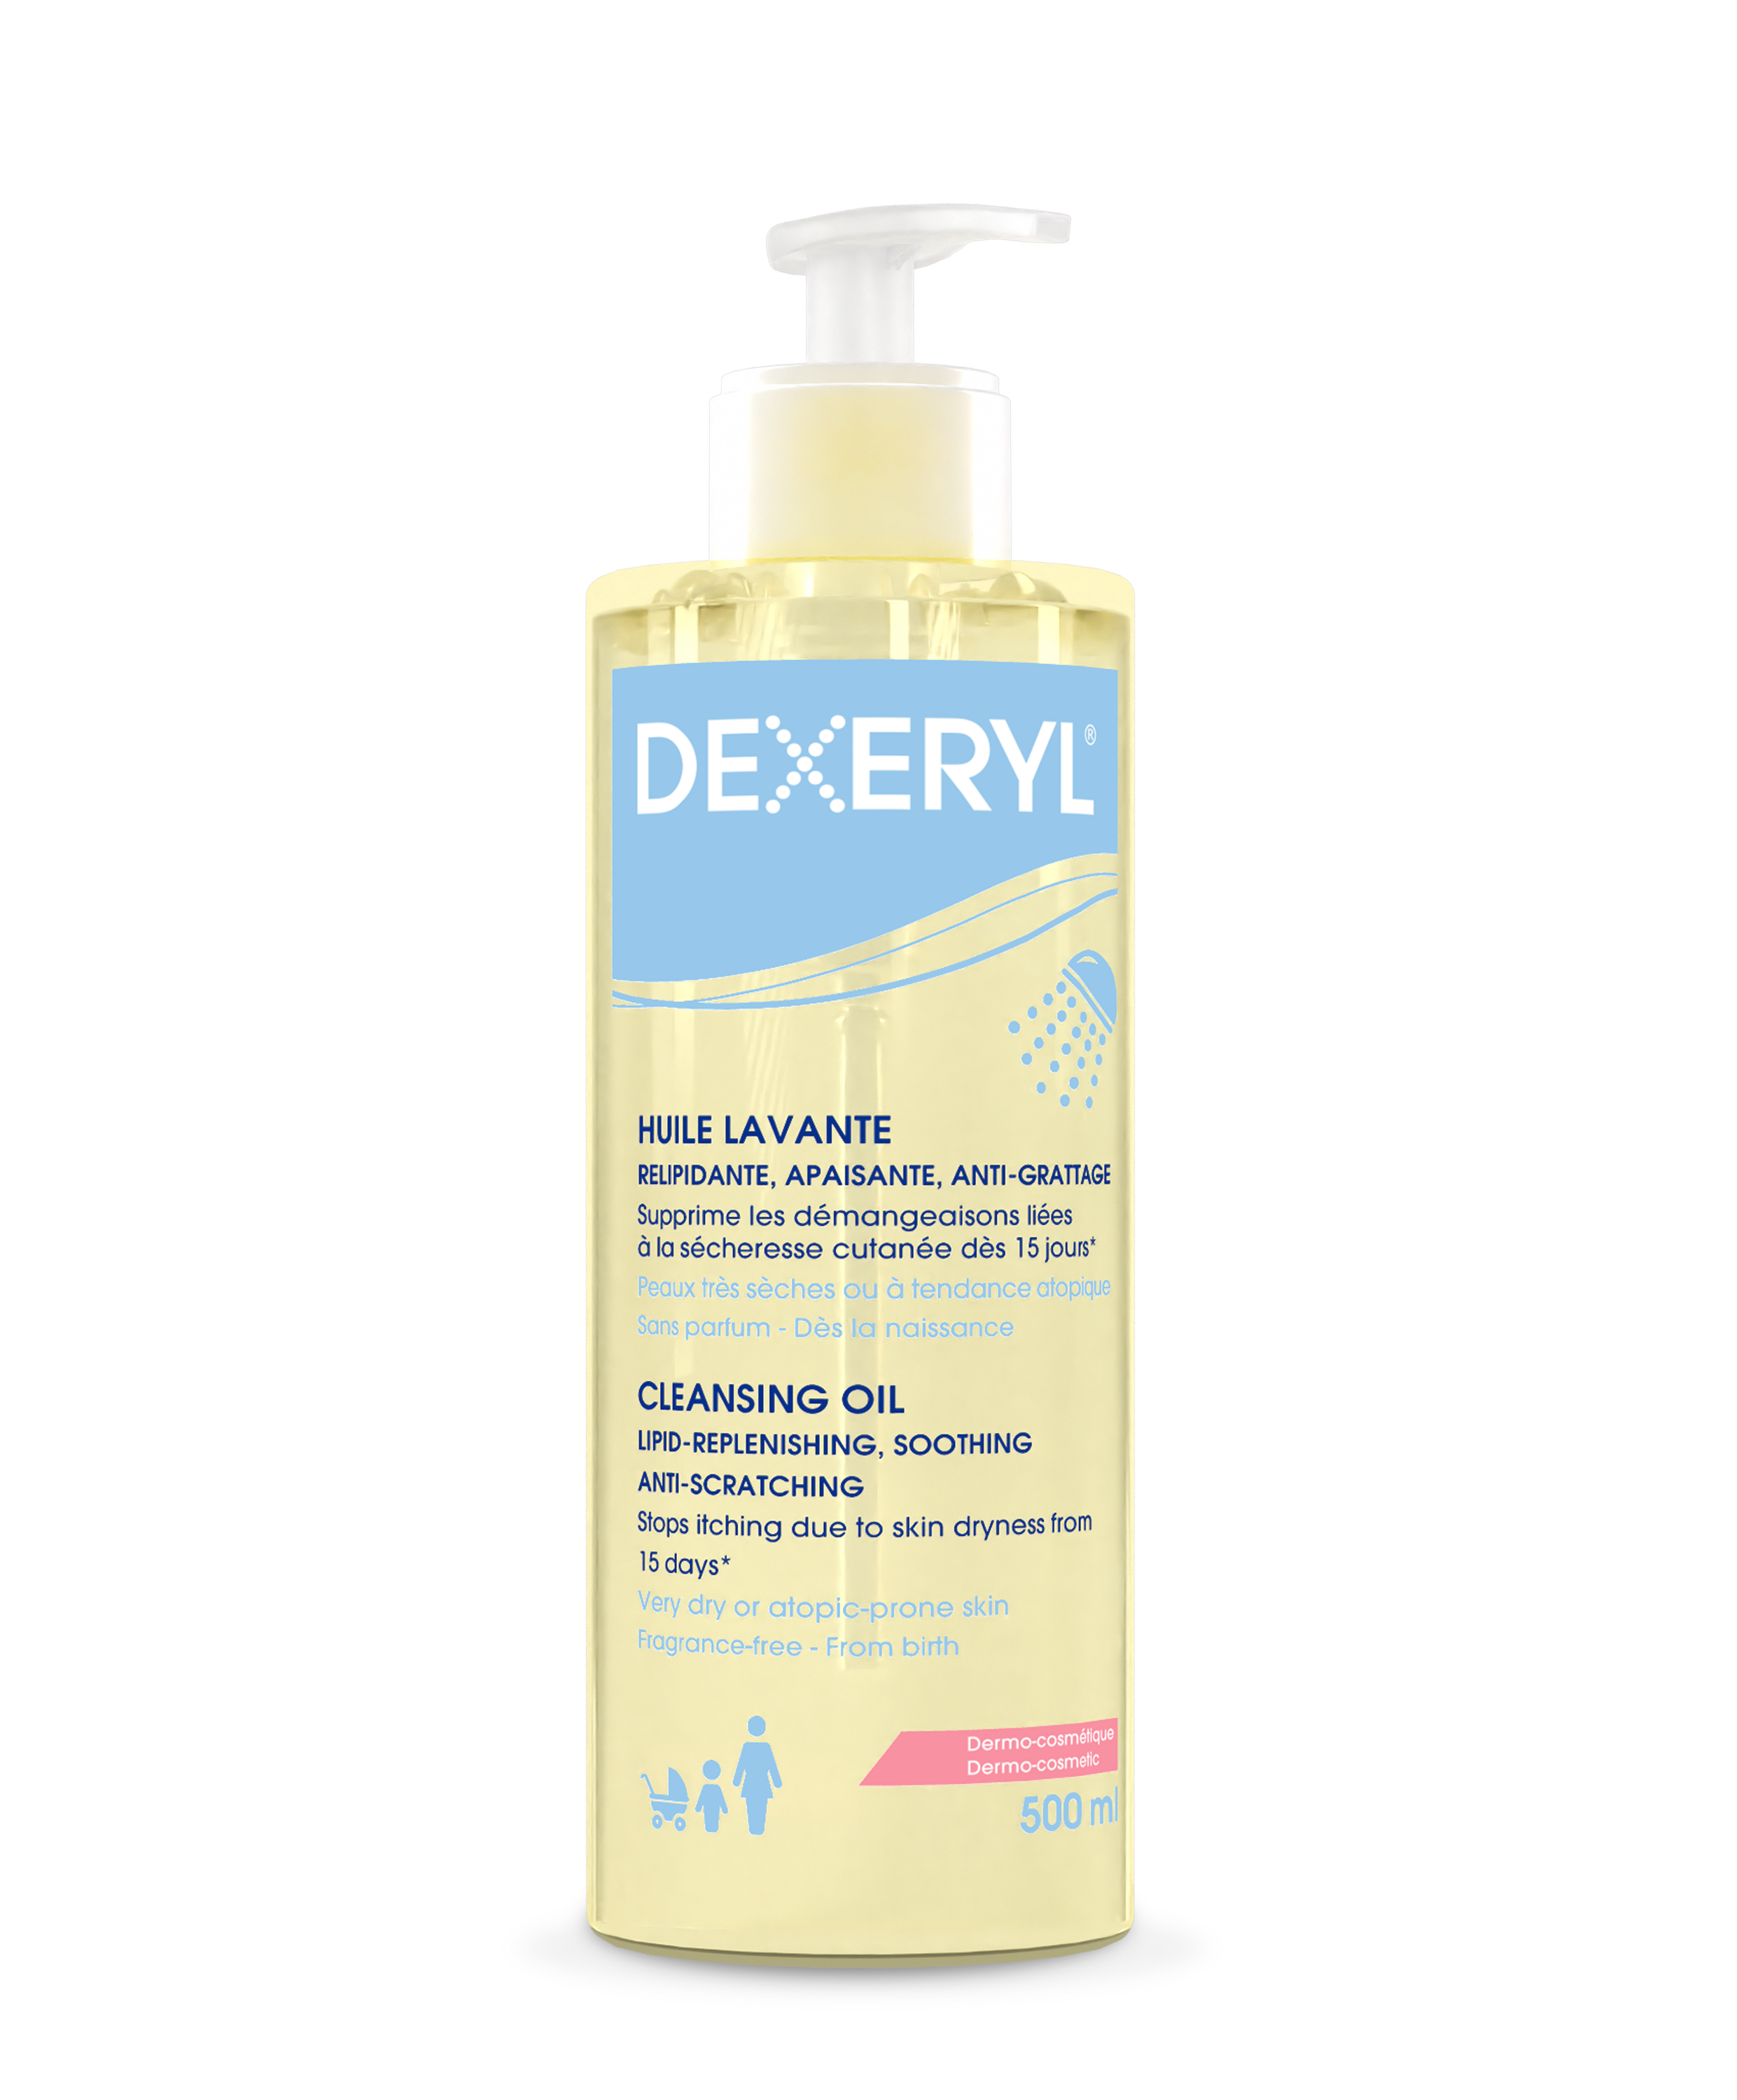 md_dexeryl_cleansing-oil_front_500ml_cee1_3592610002156